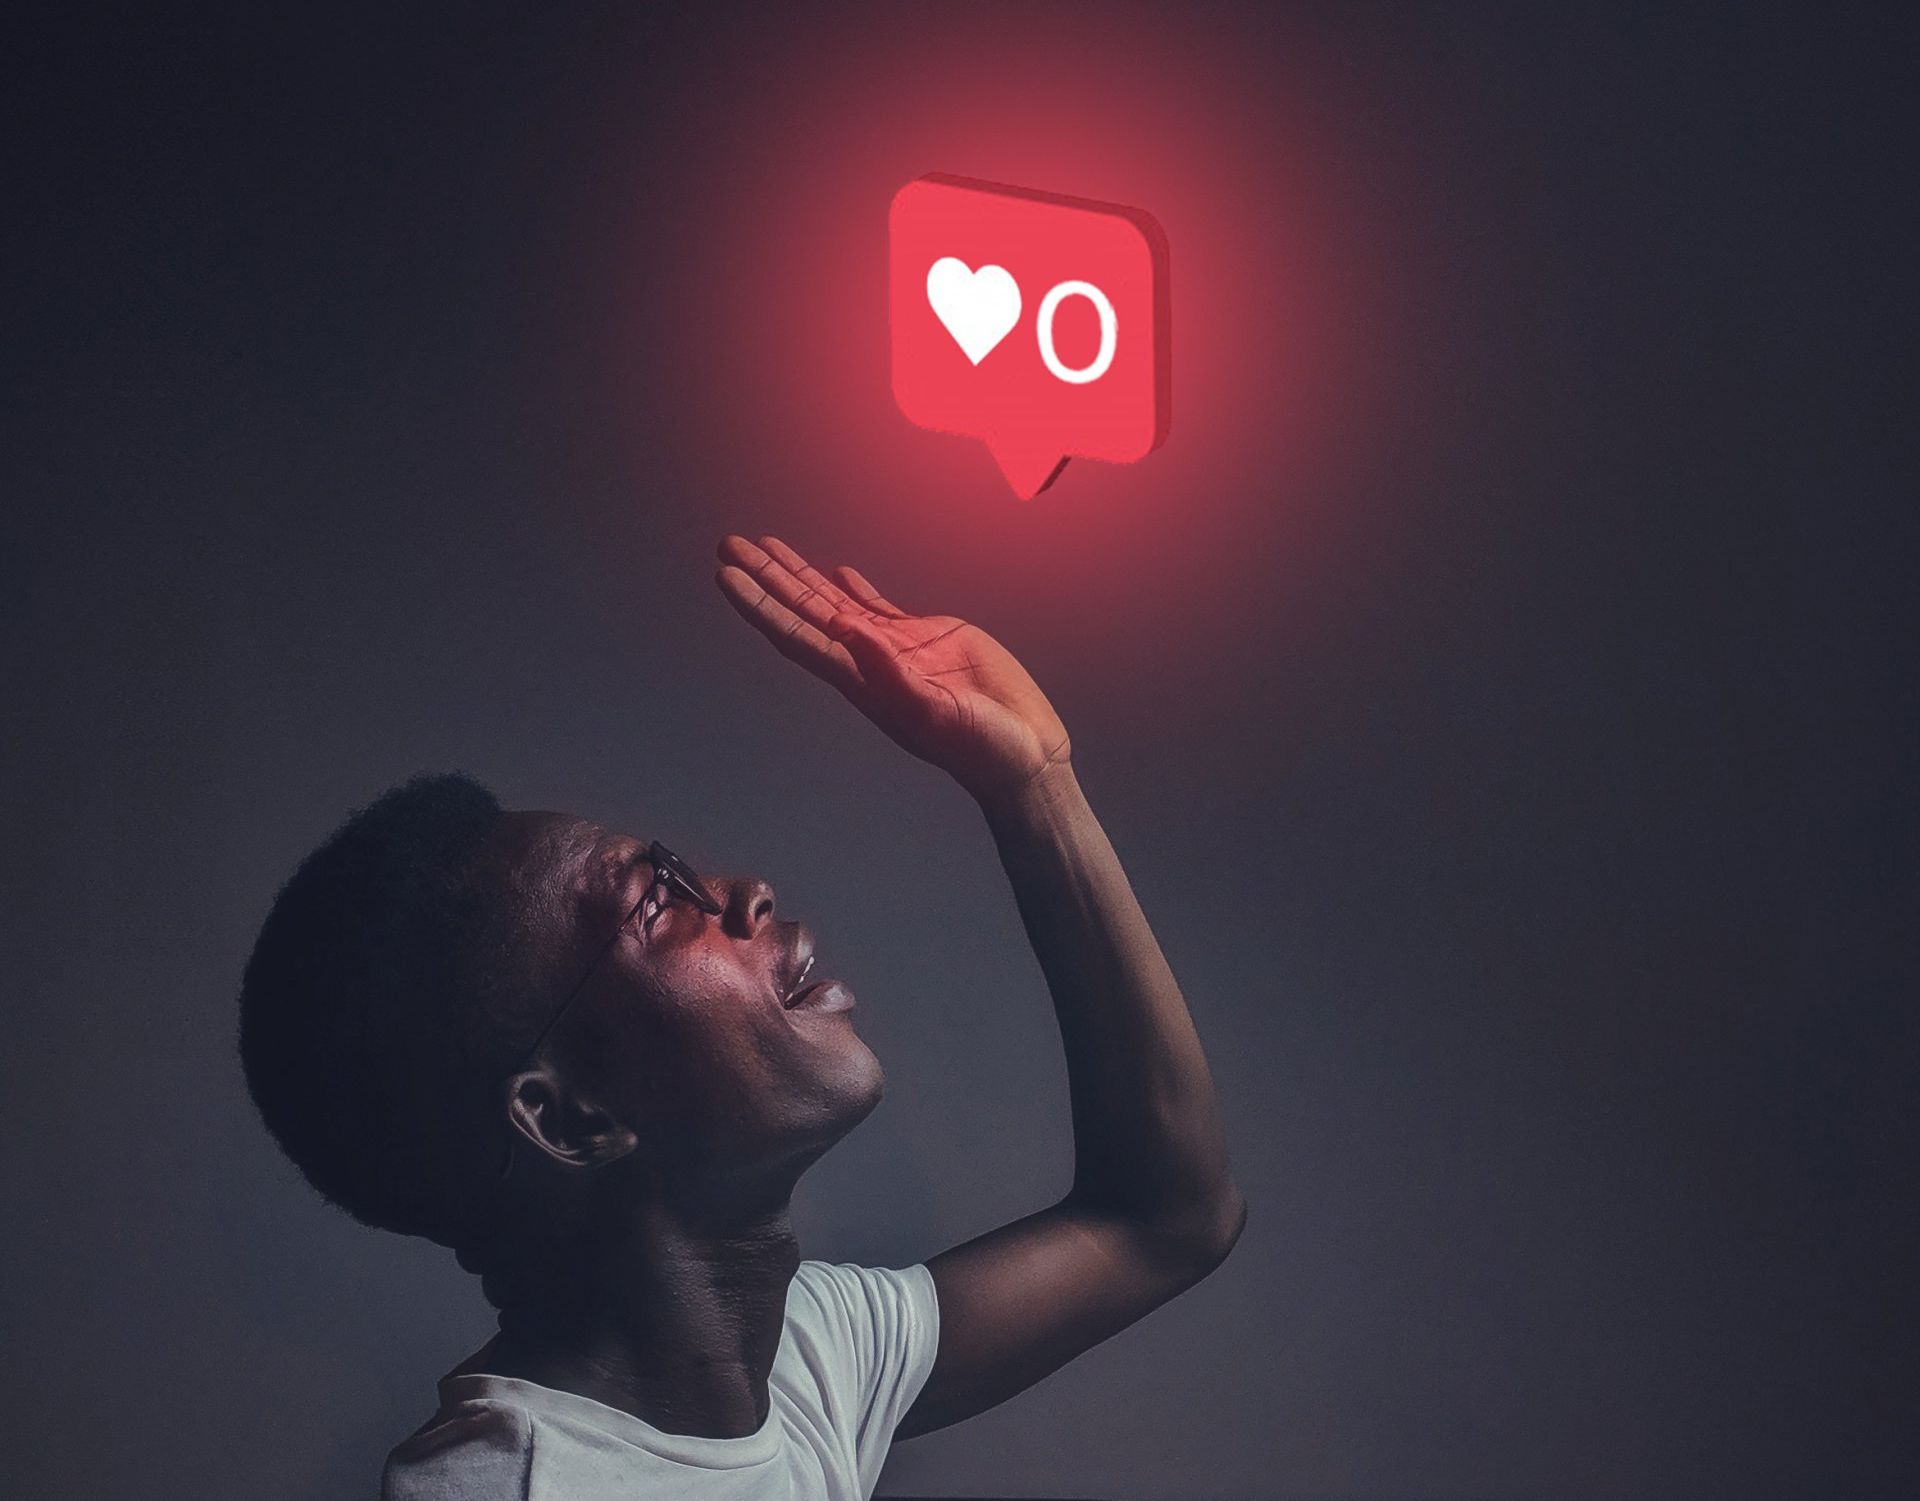 Image of a man reaching for a like icon